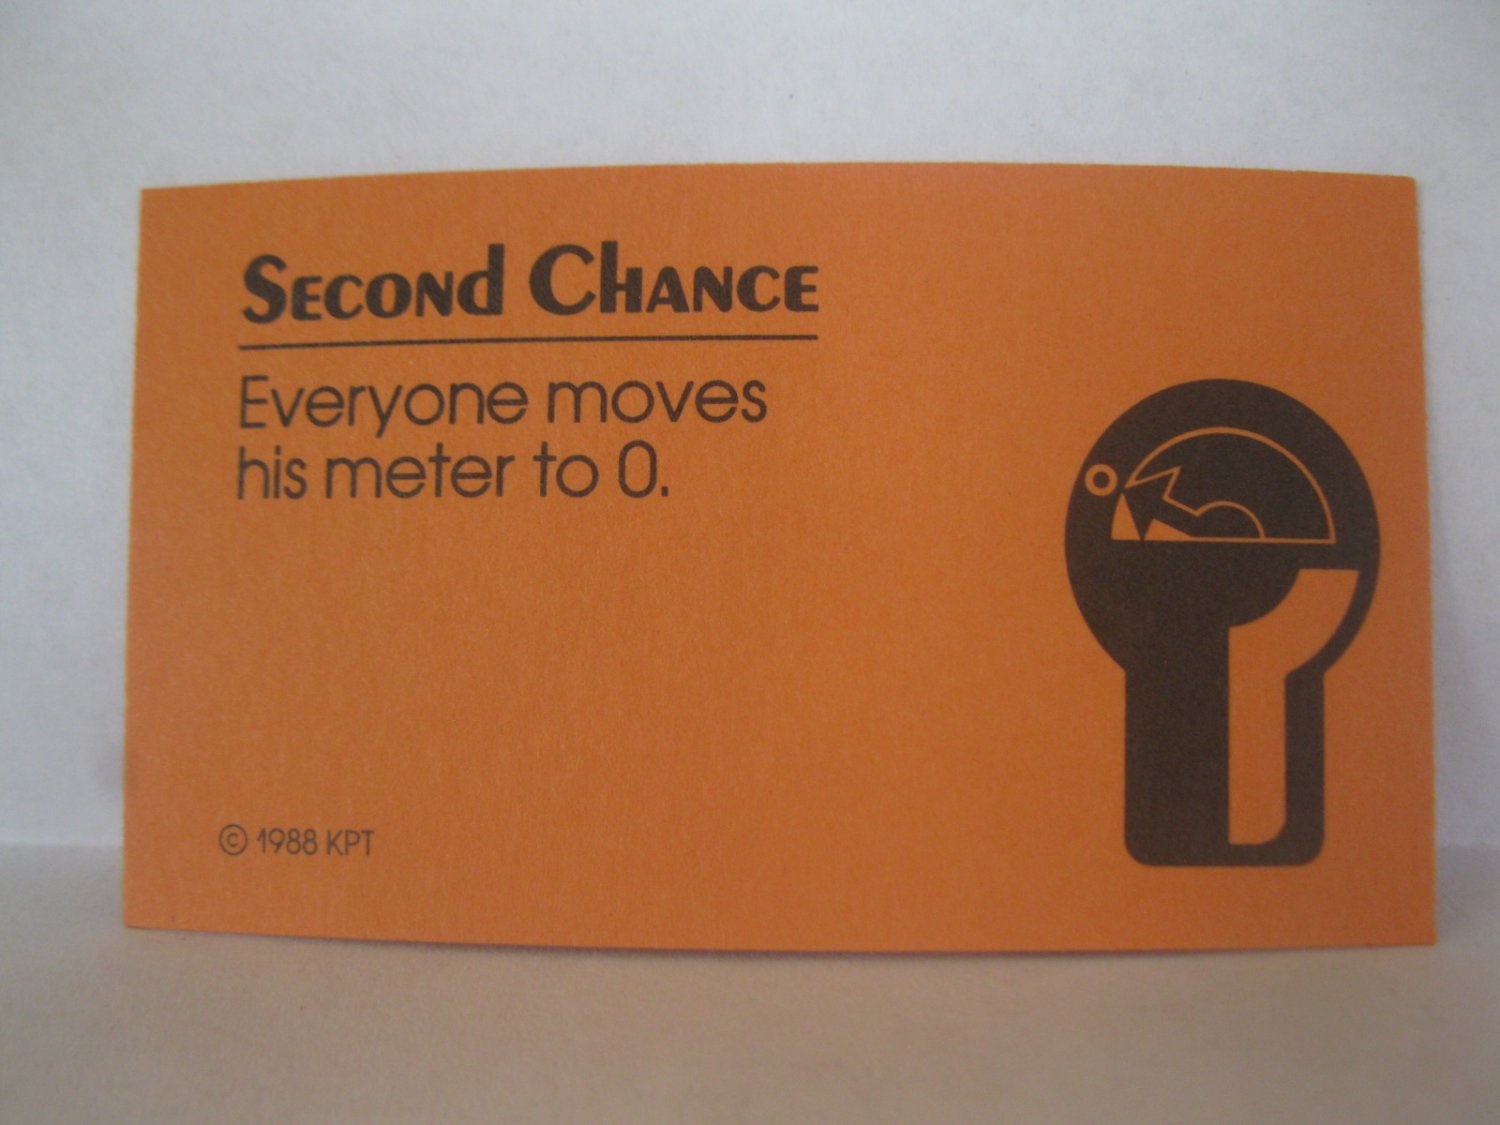 1988 Free Parking Board Game Piece: Second Chance card #4